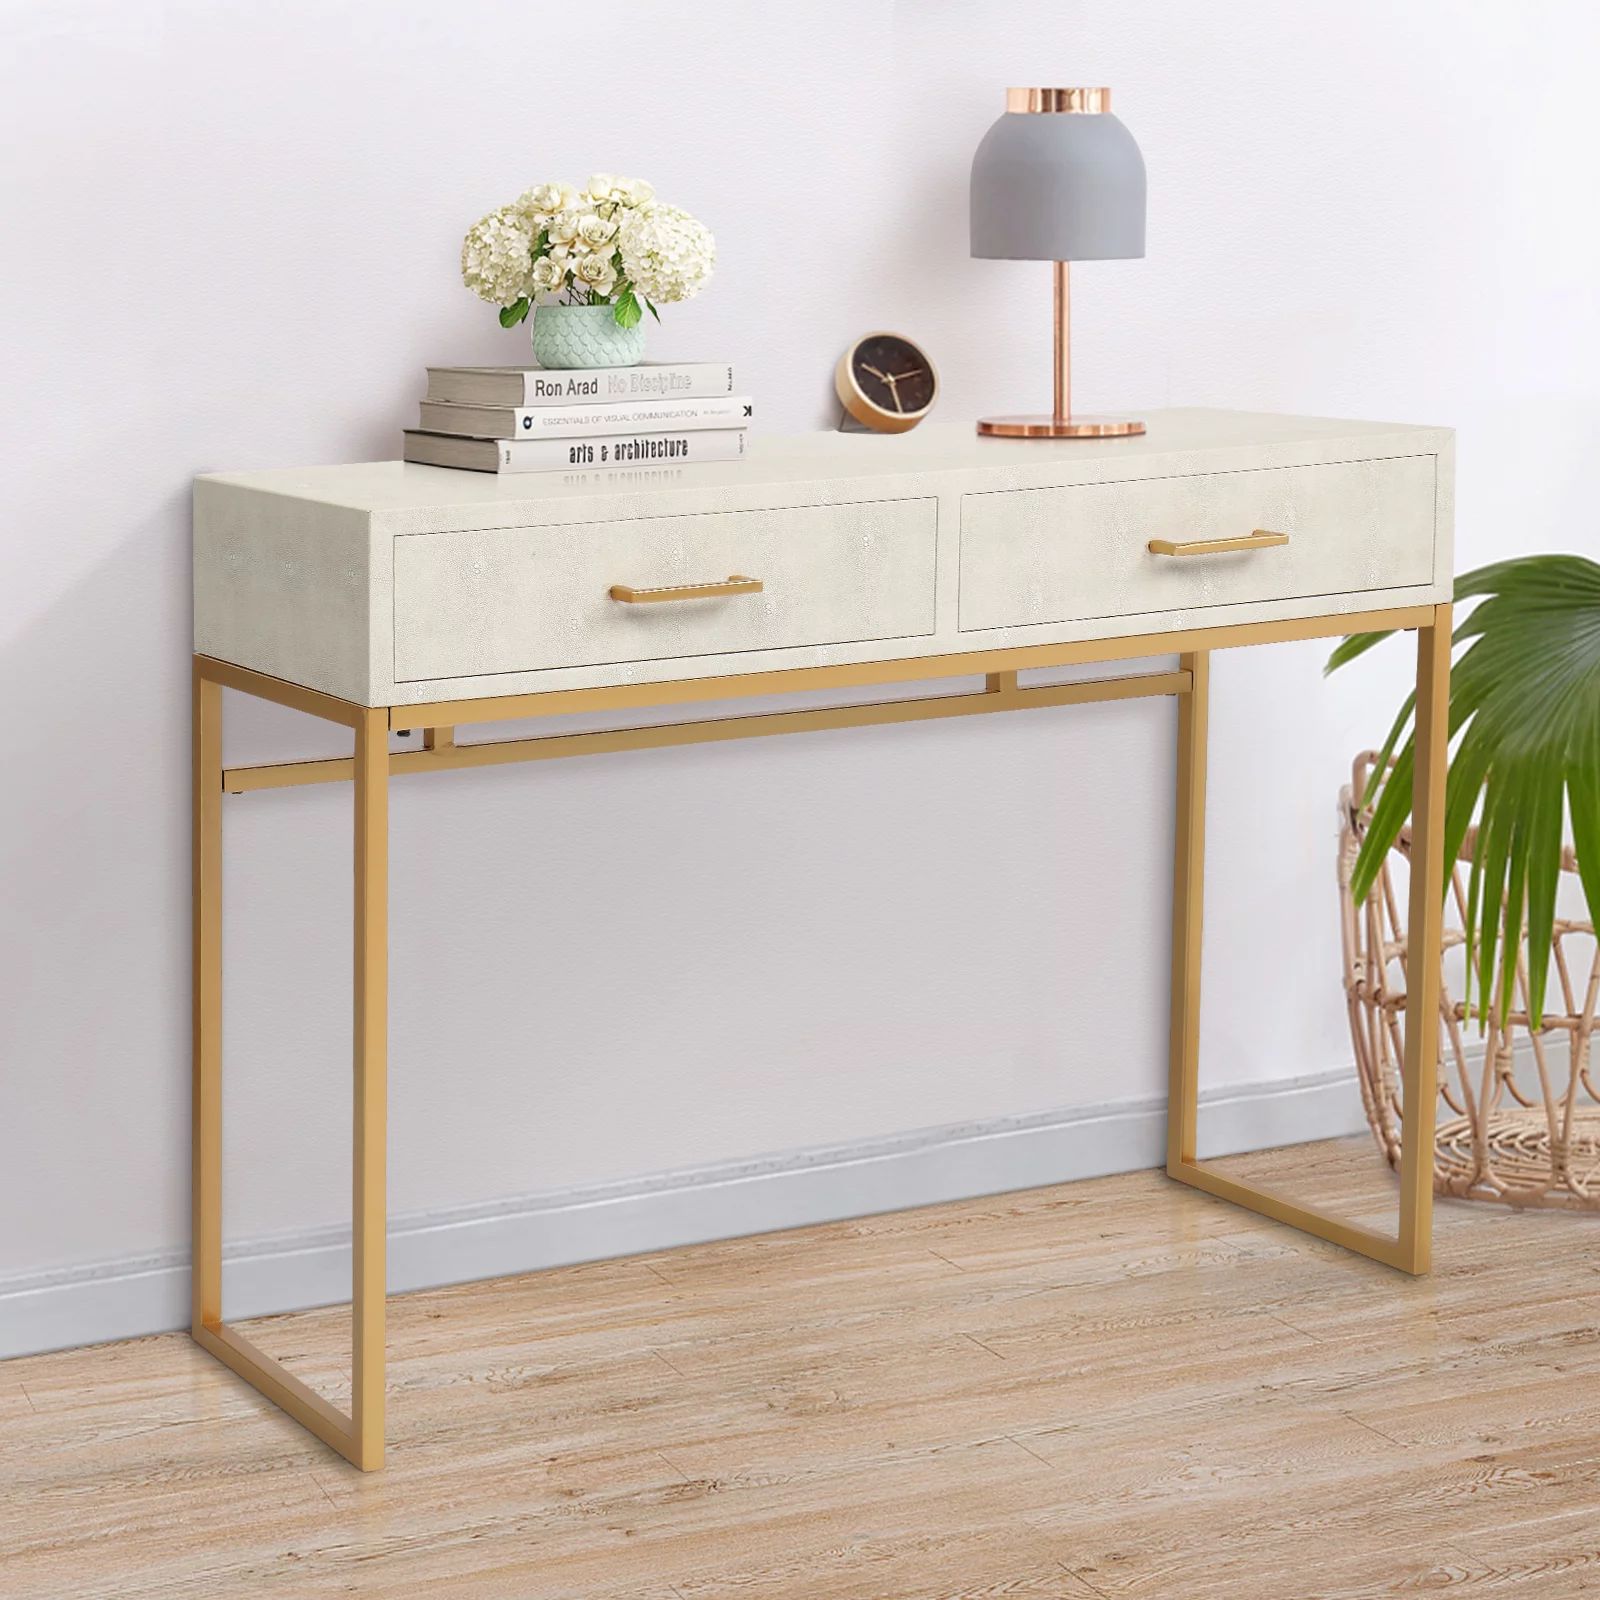 Zimtown Console Table for Entryway, Entry Table with Drawers, Sofa Side Table for Entryway Living... | Walmart (US)